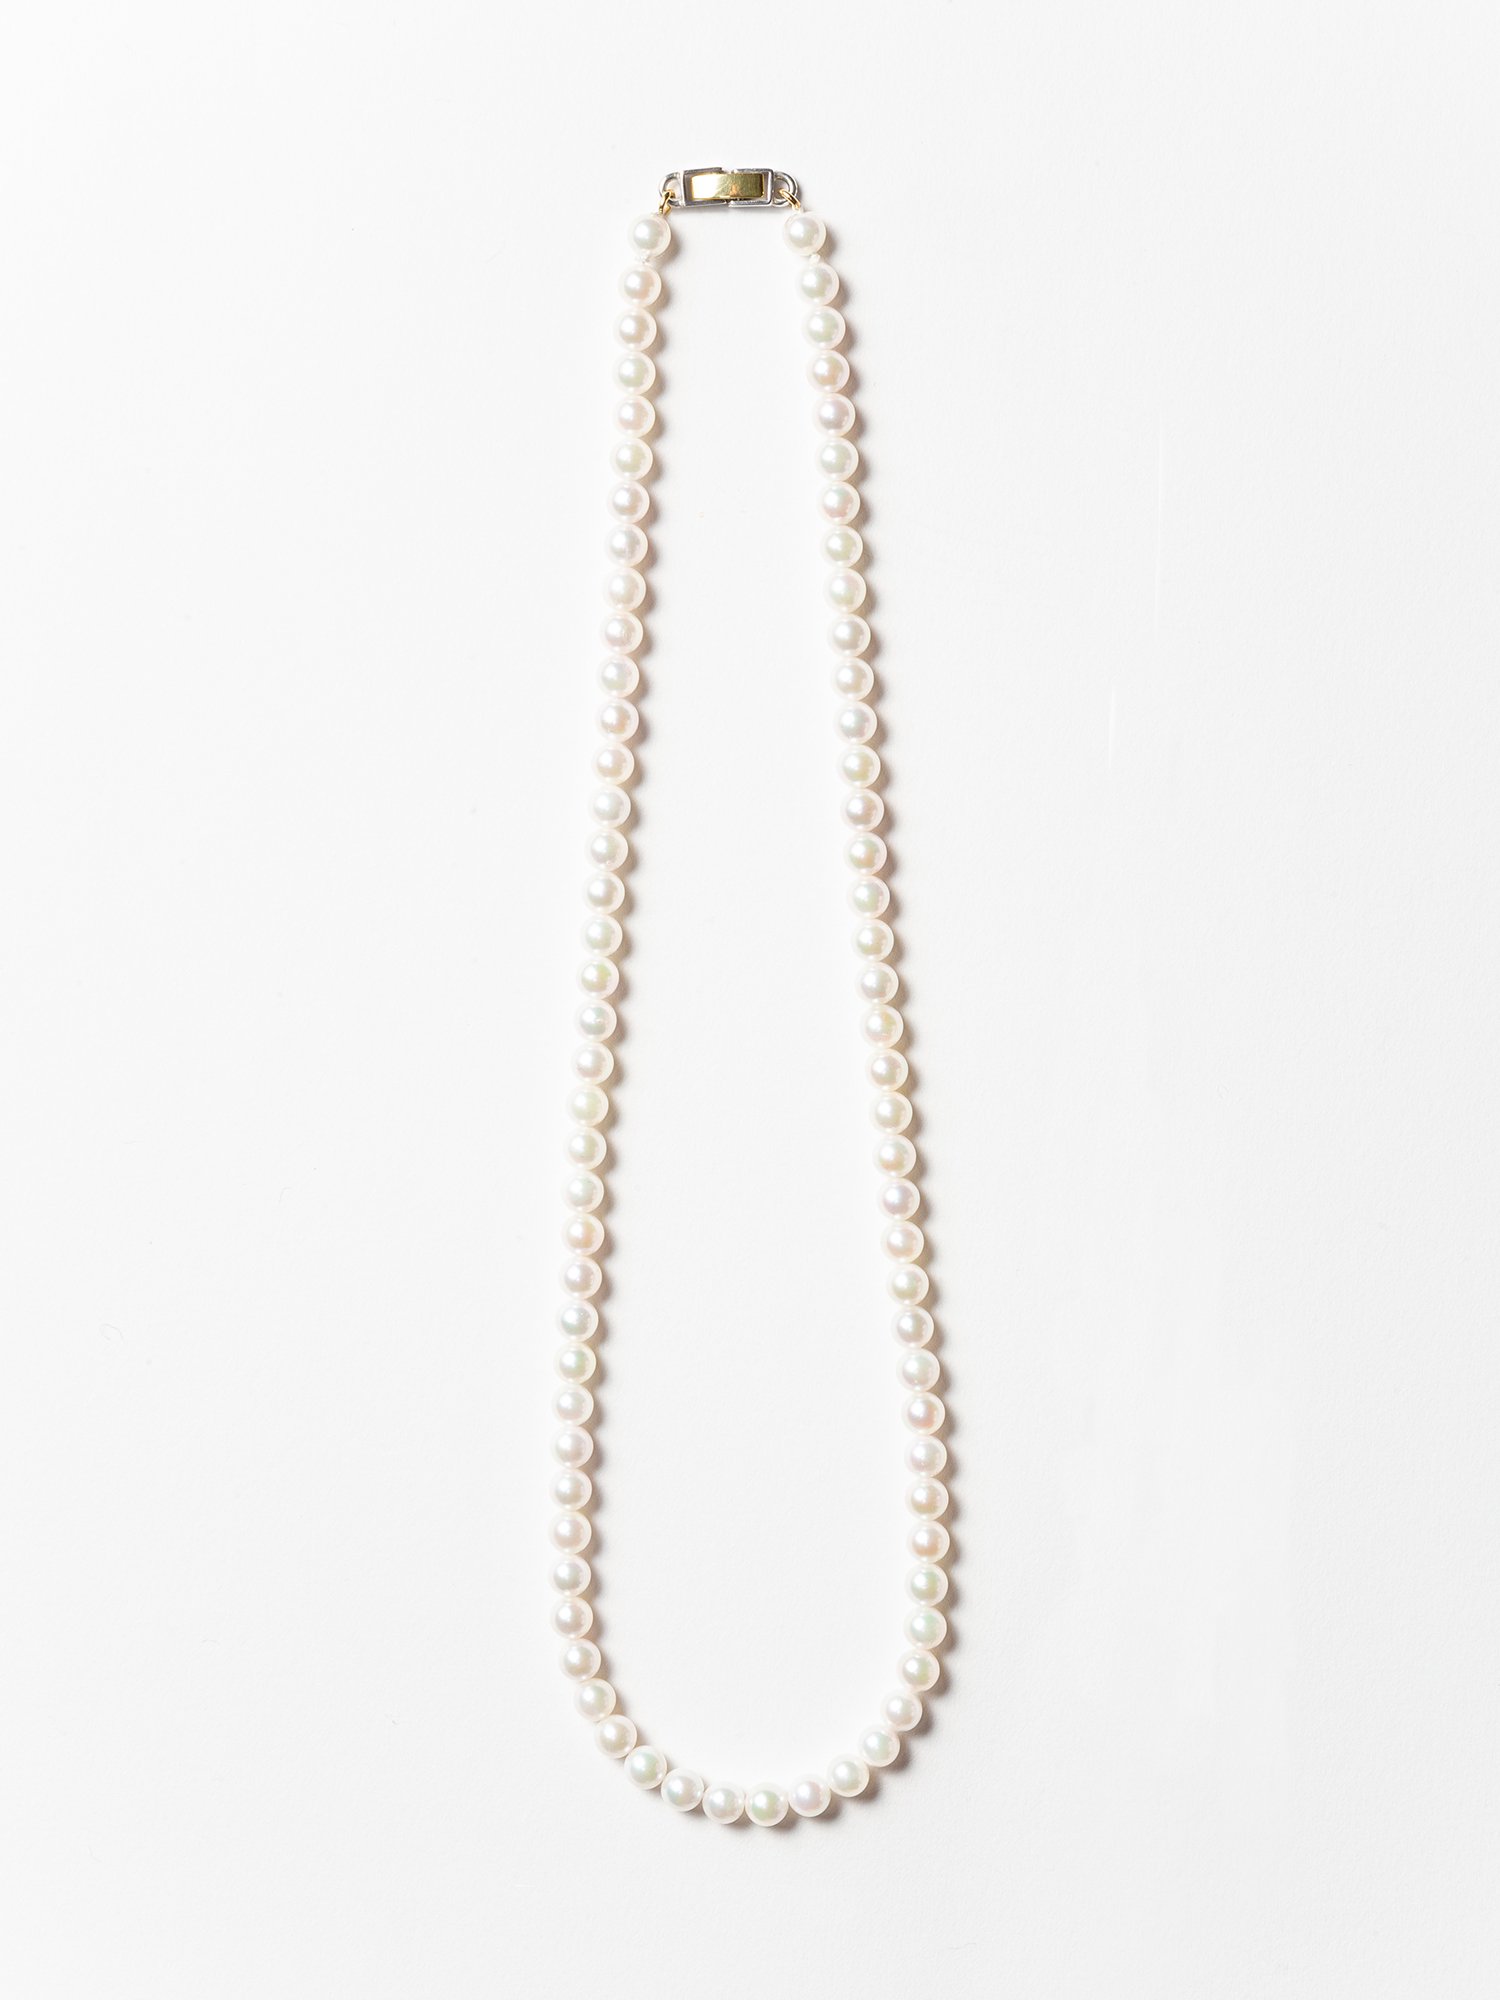 ARTEMIS /  baby pearl necklace